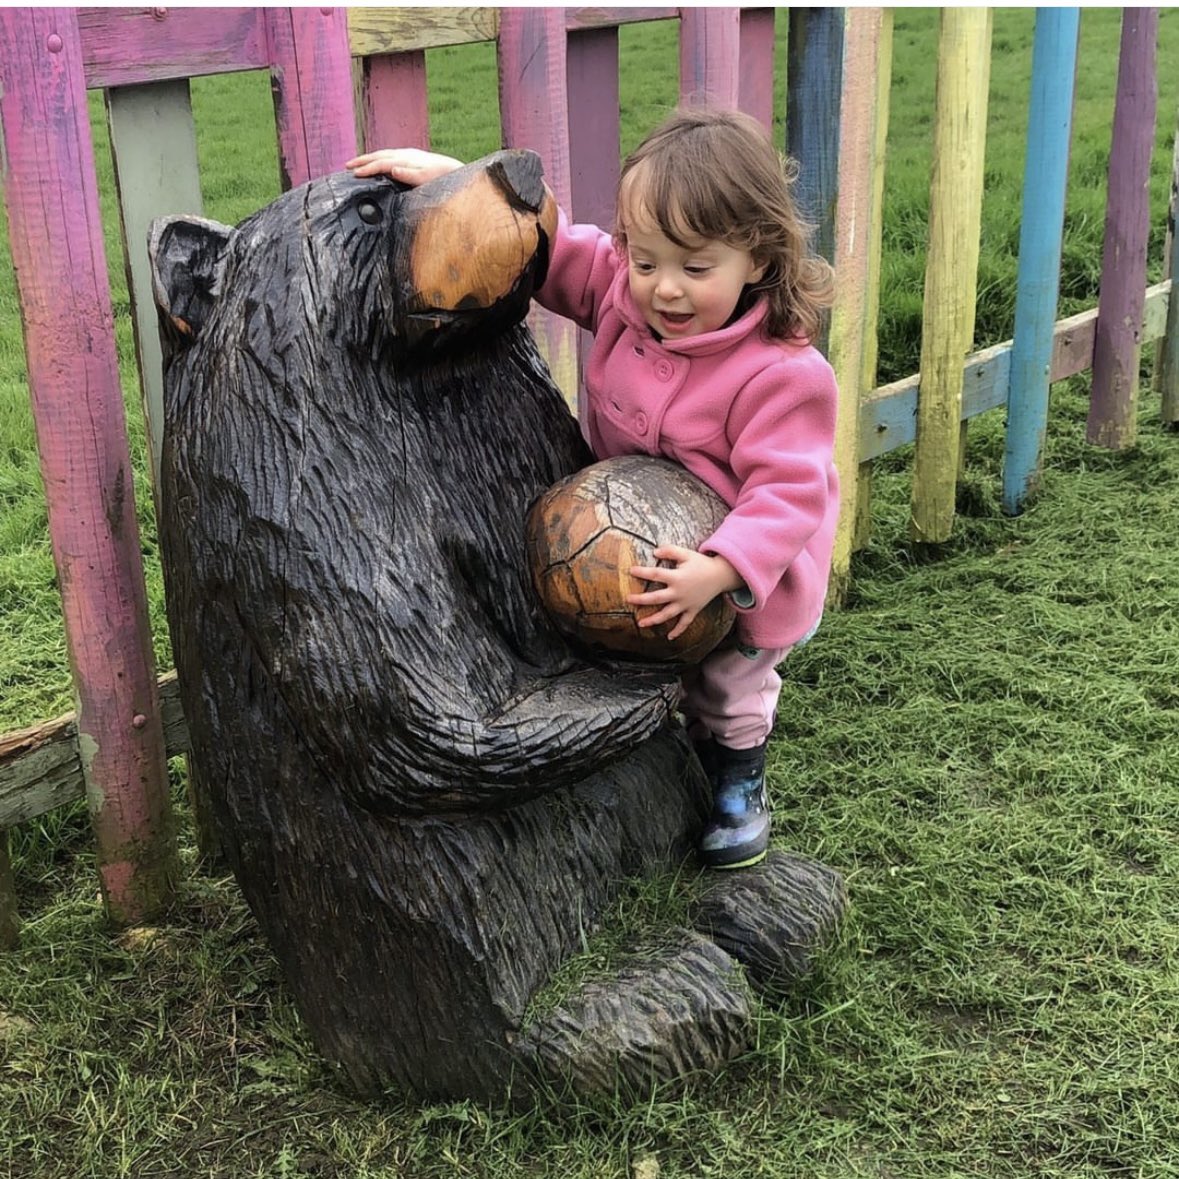 Another wonderful photo sent to us from @mrssarah_hall2023 of her little girl, Harper, with our football bear! 🐻 Keep sending in your best trail snaps, we love to see and share them: socialmediachissoc@gmail.com #chislehurst #chislehurstsociety